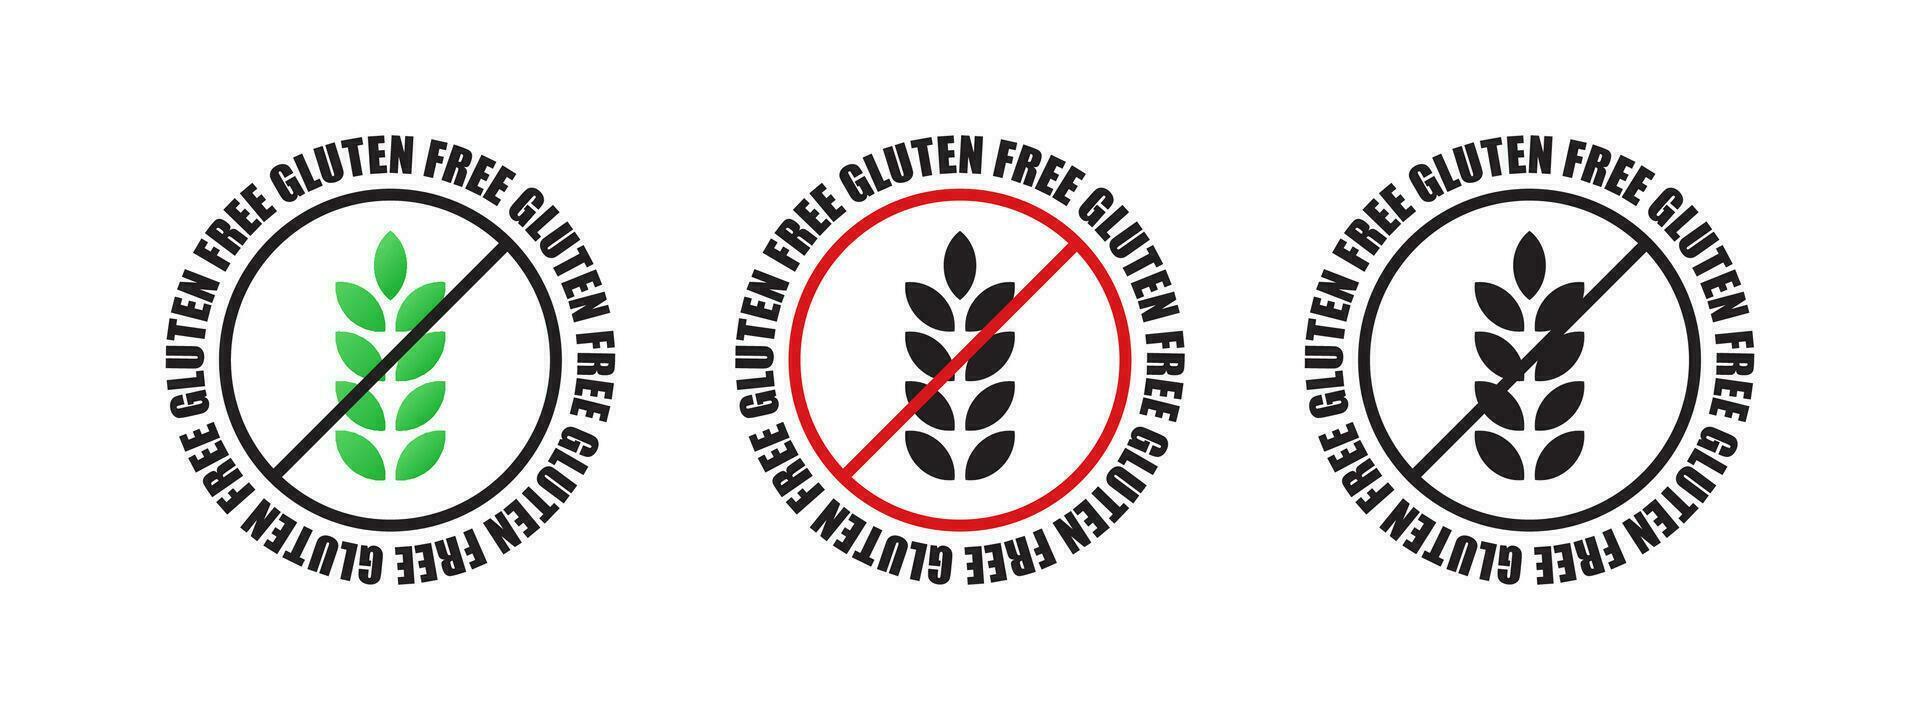 Gluten free. Round badges with the inscription gluten free. Natural and organic products. Vector scalable graphics